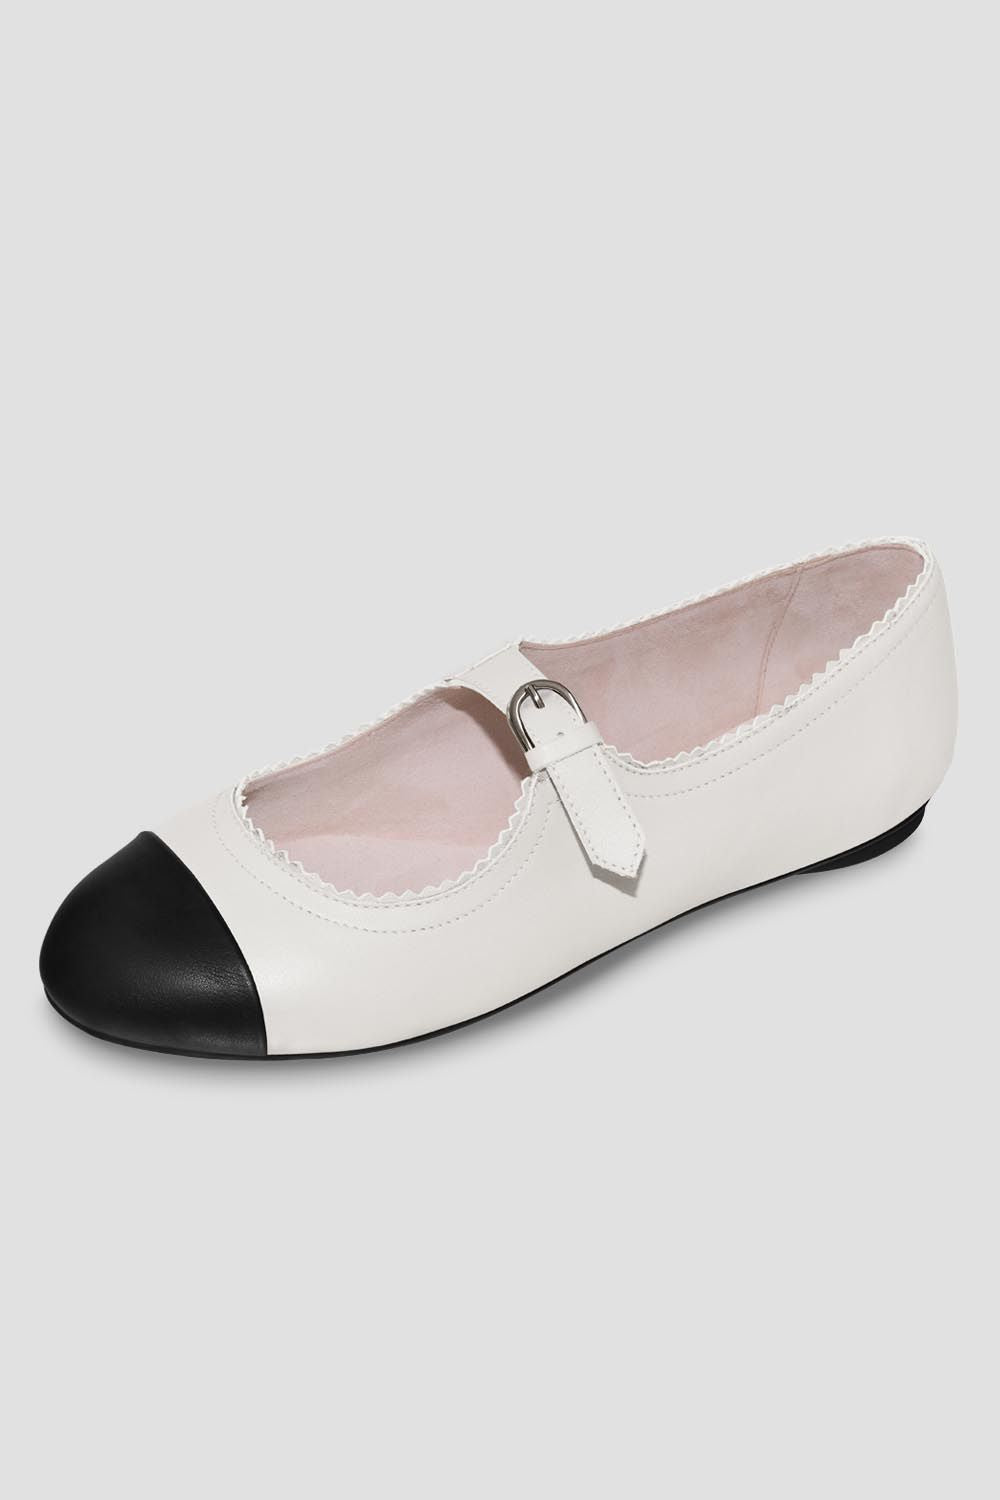 Bloch Ladies Cassiopeia Ballet Flats, White Black Leather